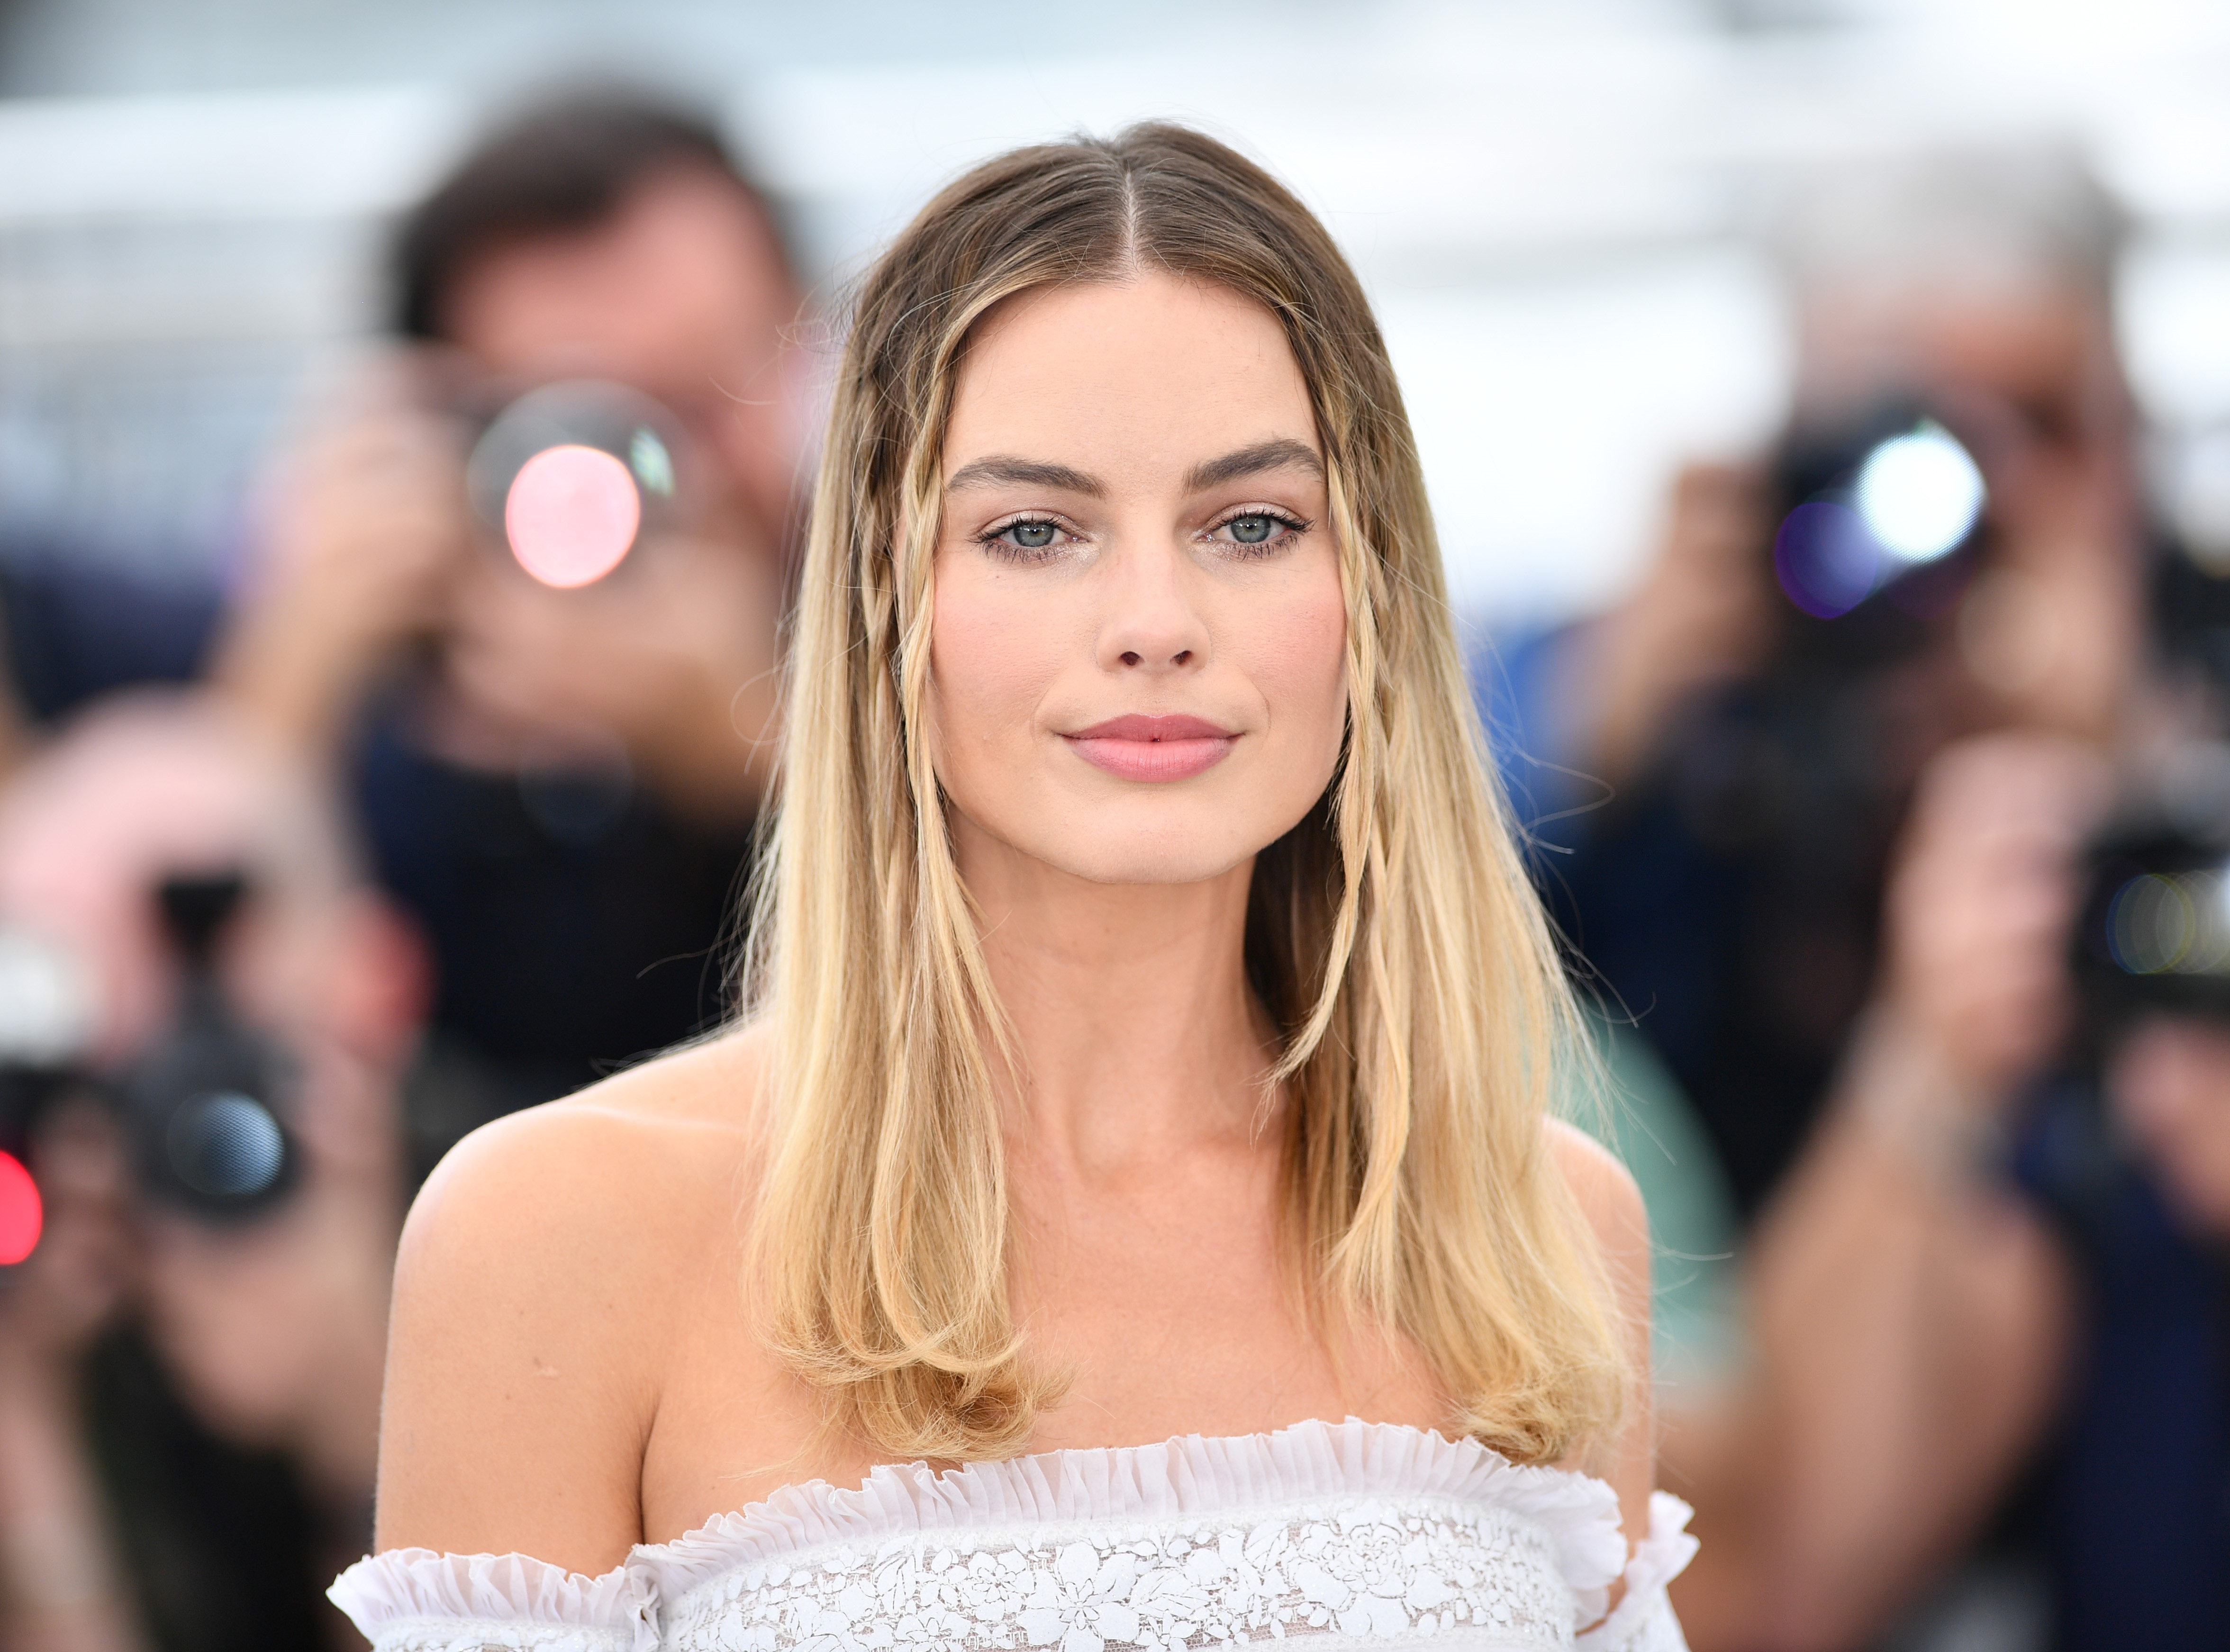 CANNES, FRANCE - MAY 22: Australian actress Margot Robbie poses during the photocall for the film 'Once Upon A Time... In Hollywood' in competition at the 72nd annual Cannes Film Festival in Cannes, France on May 22, 2019. (Photo by Mustafa Yalcin/Anadolu (Foto: Getty Images)